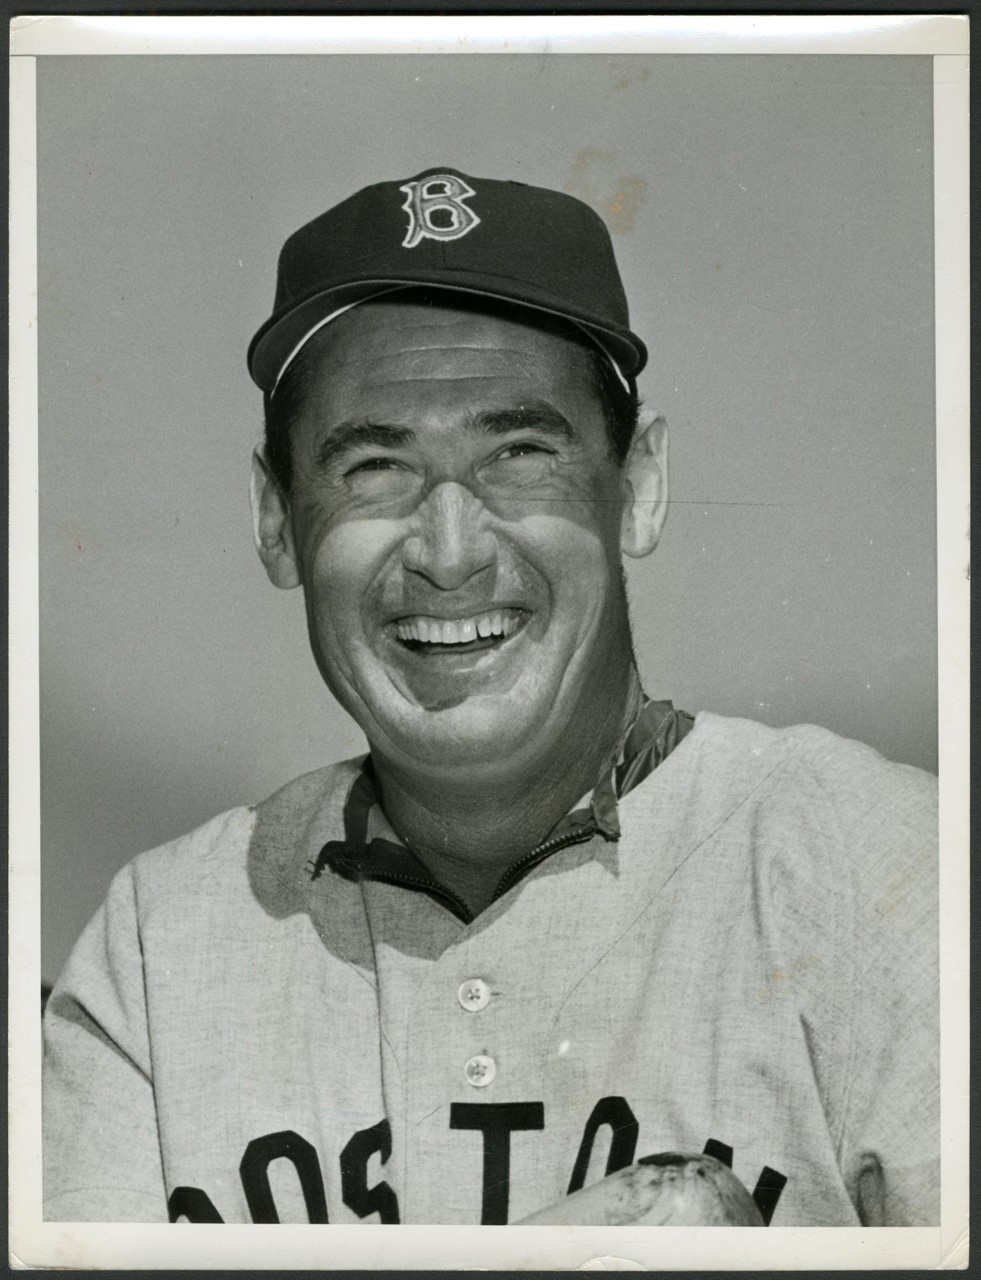 The Brown Brothers Collection - Ted Williams with a Big Smile Photograph